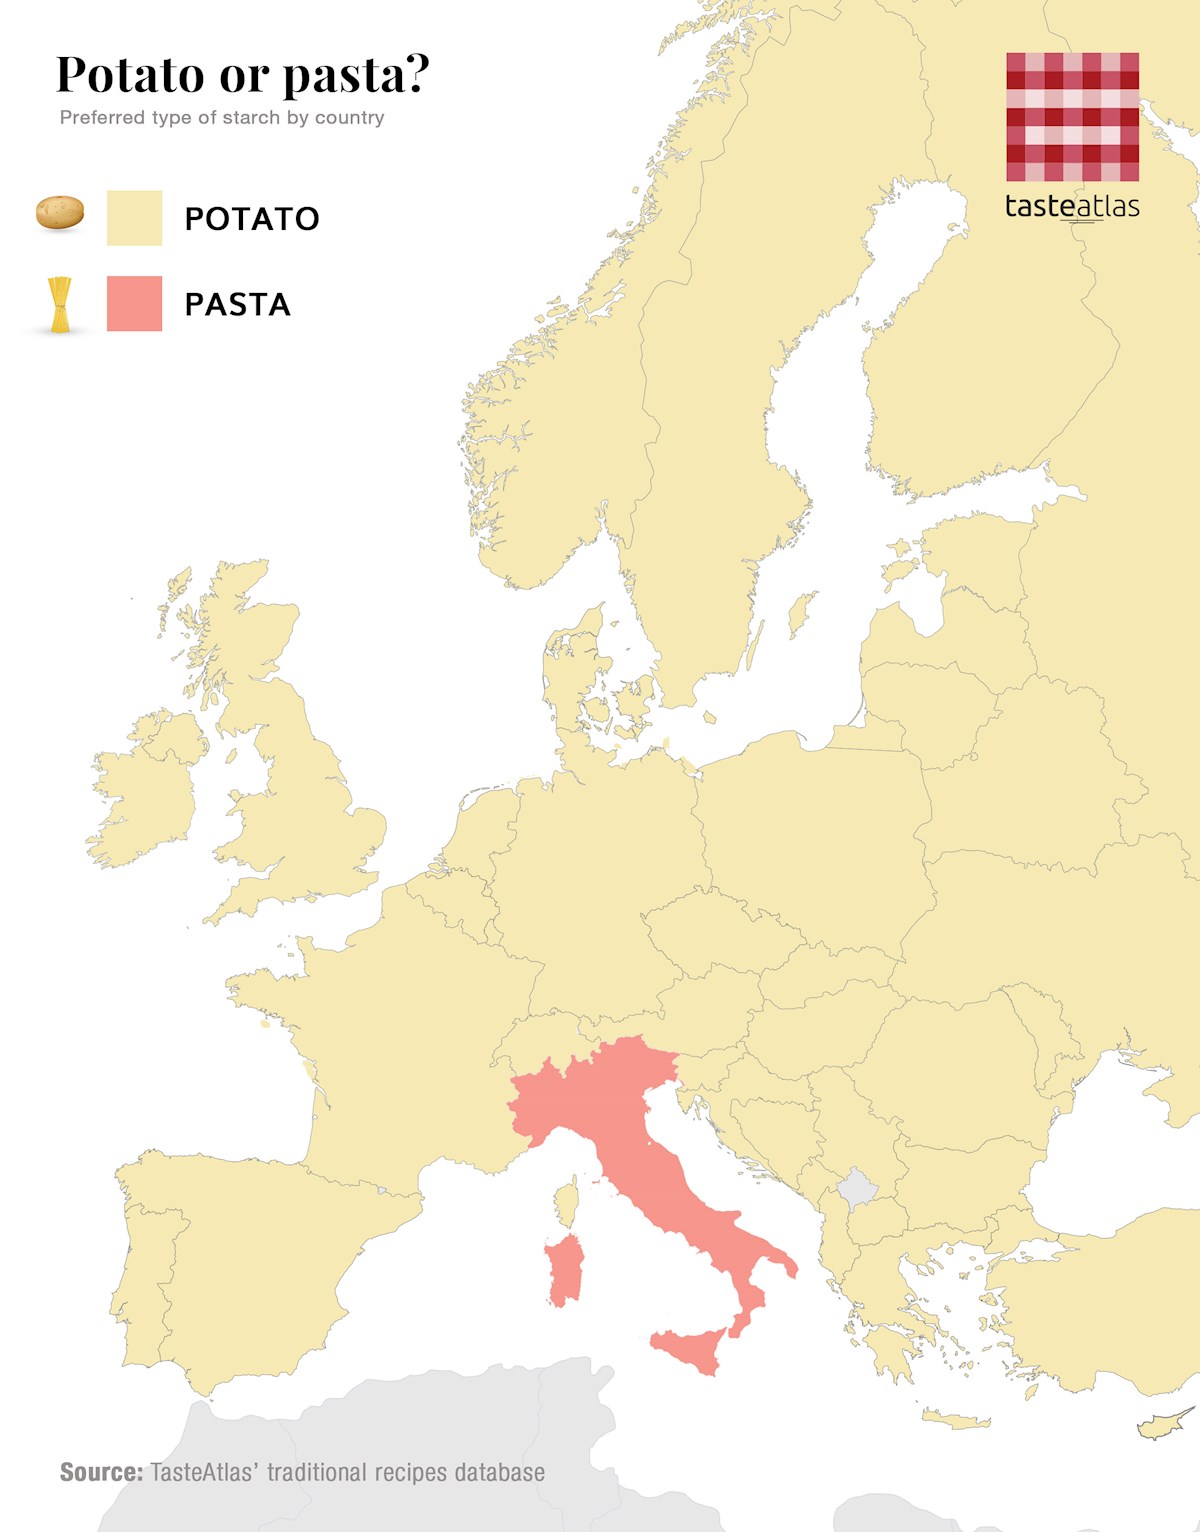 Preferred type of starch in each European country